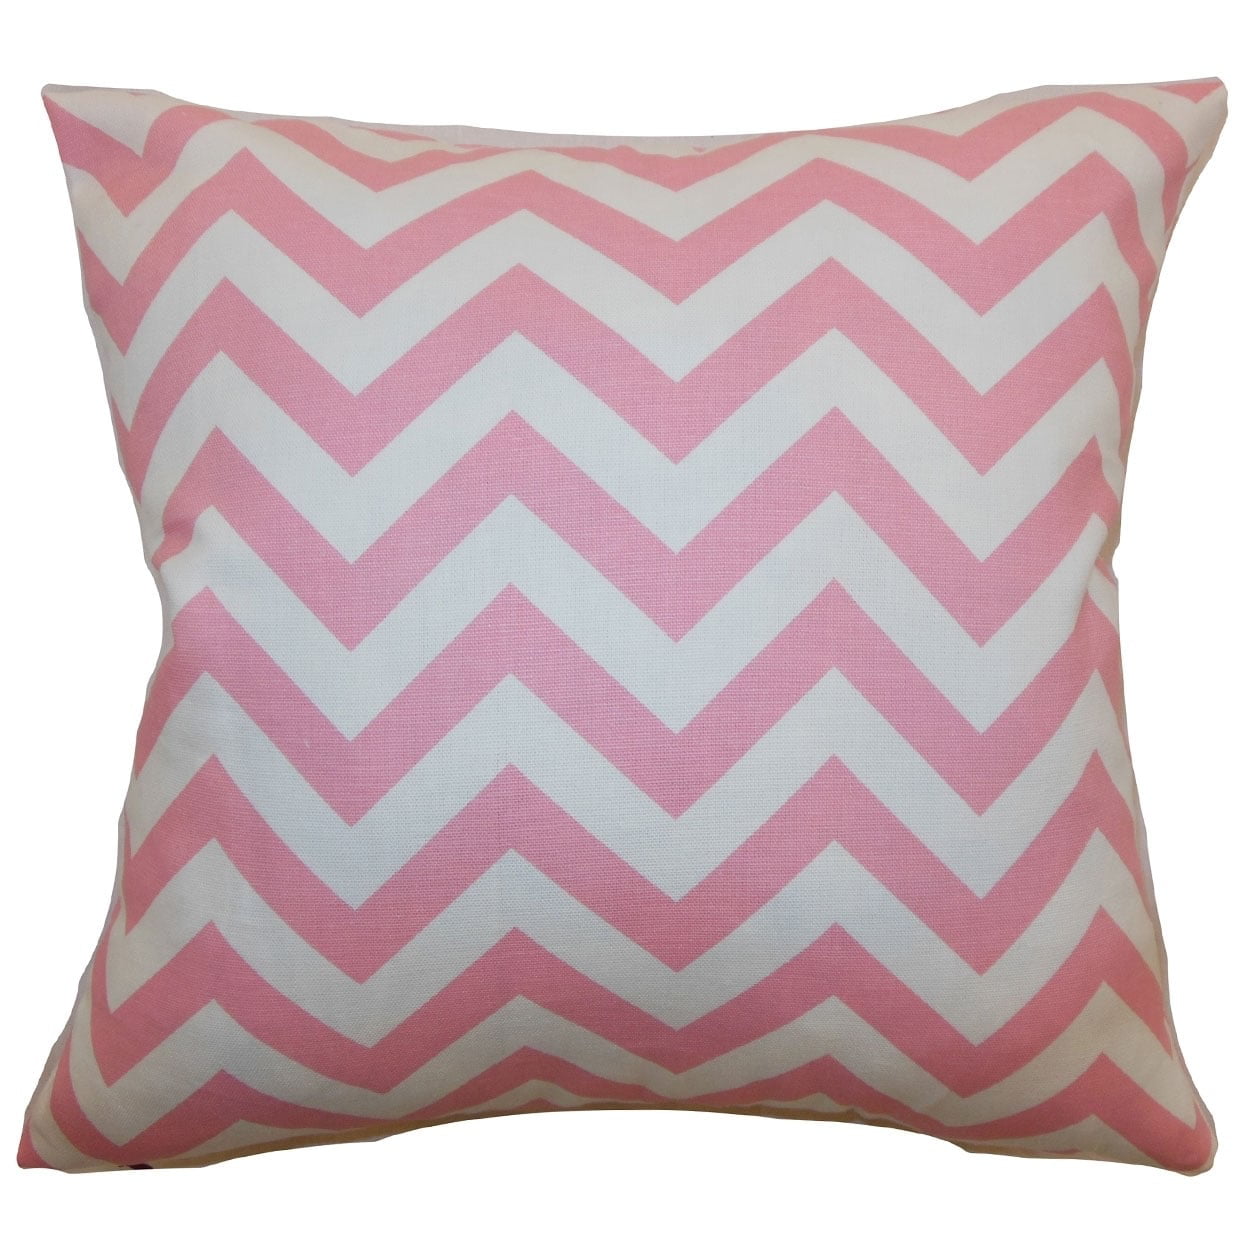 2 Piece The Pillow Collection Set of 2 18 x 18 Down Filled Eir Zigzag Throw Pillows Navy